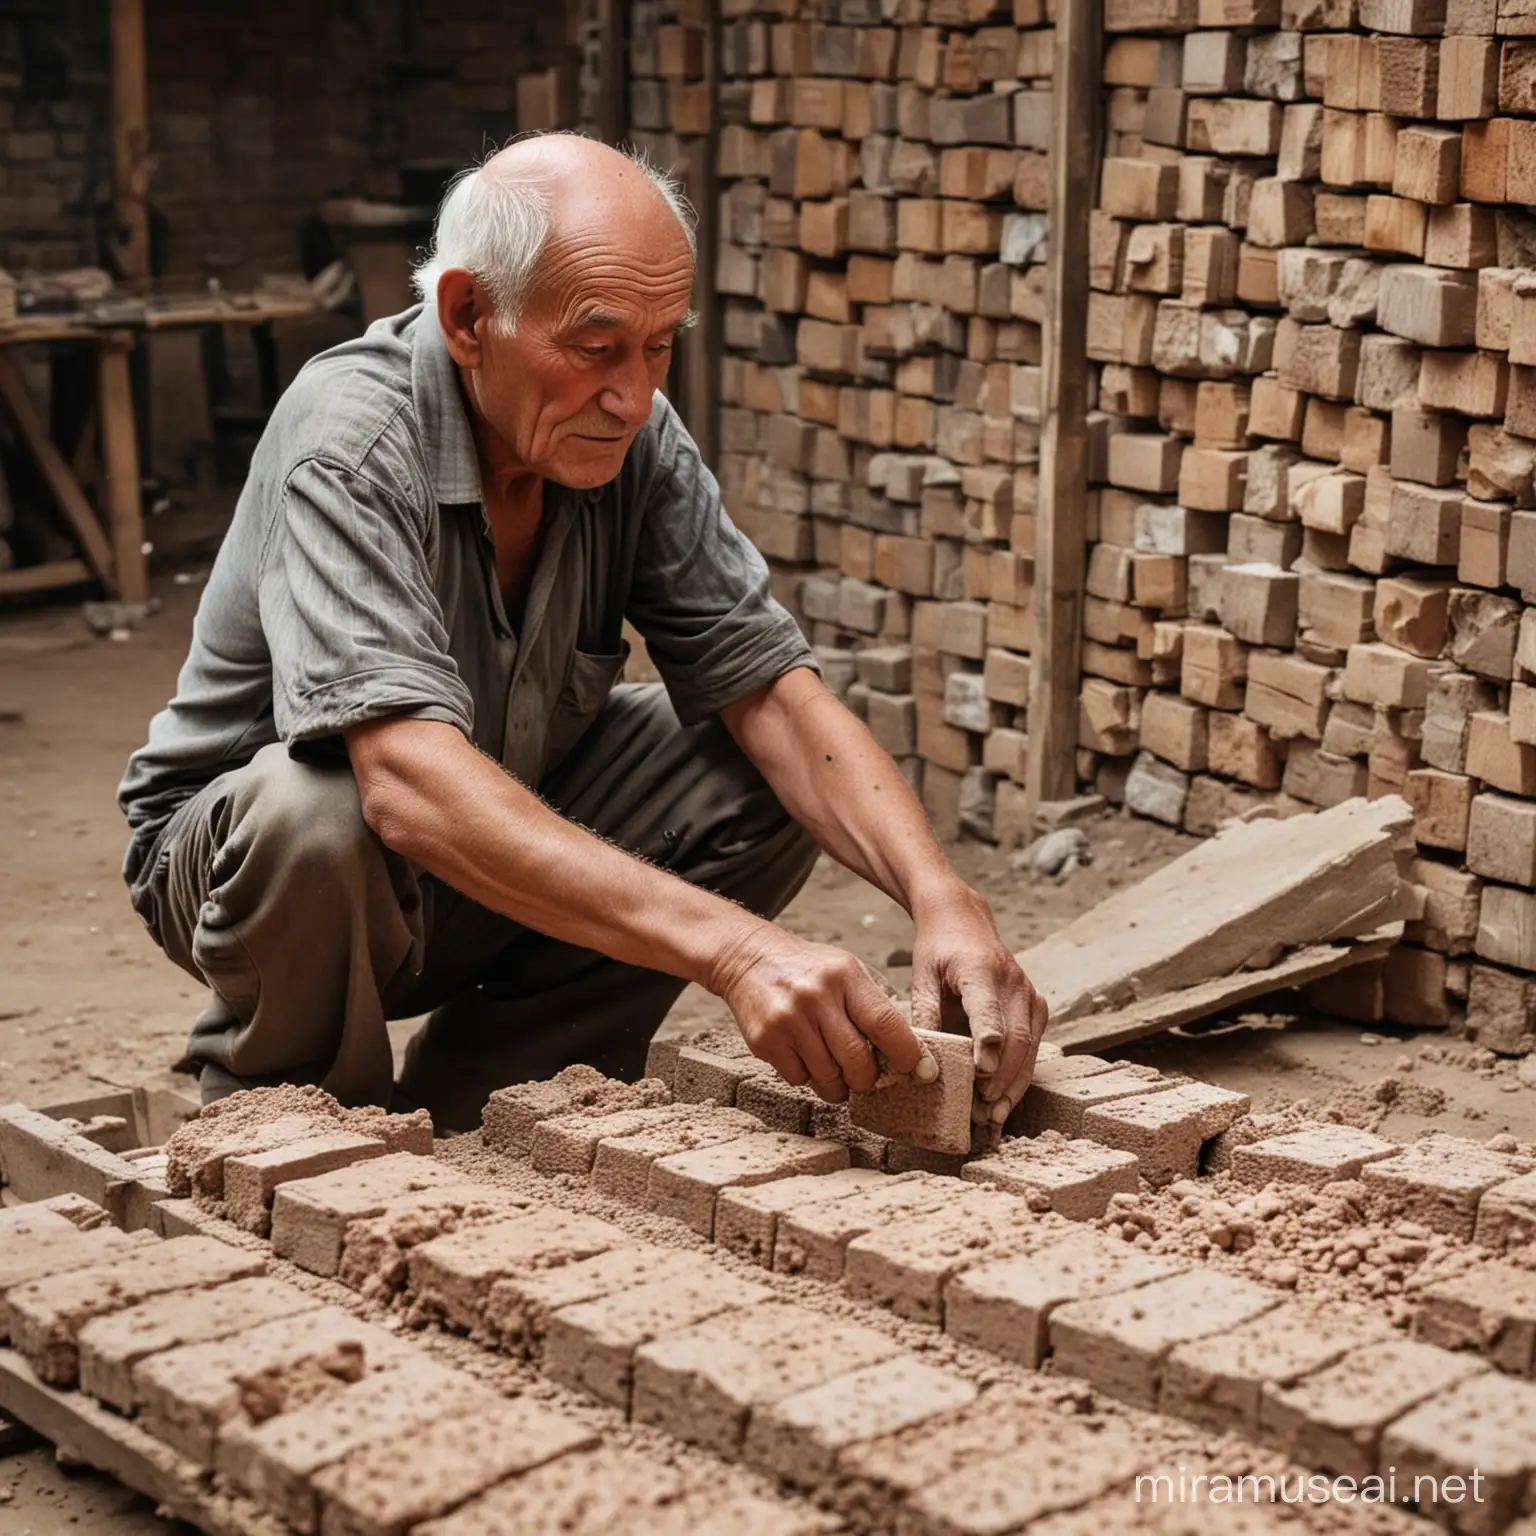 an old man making bricks out of grain in a small factory